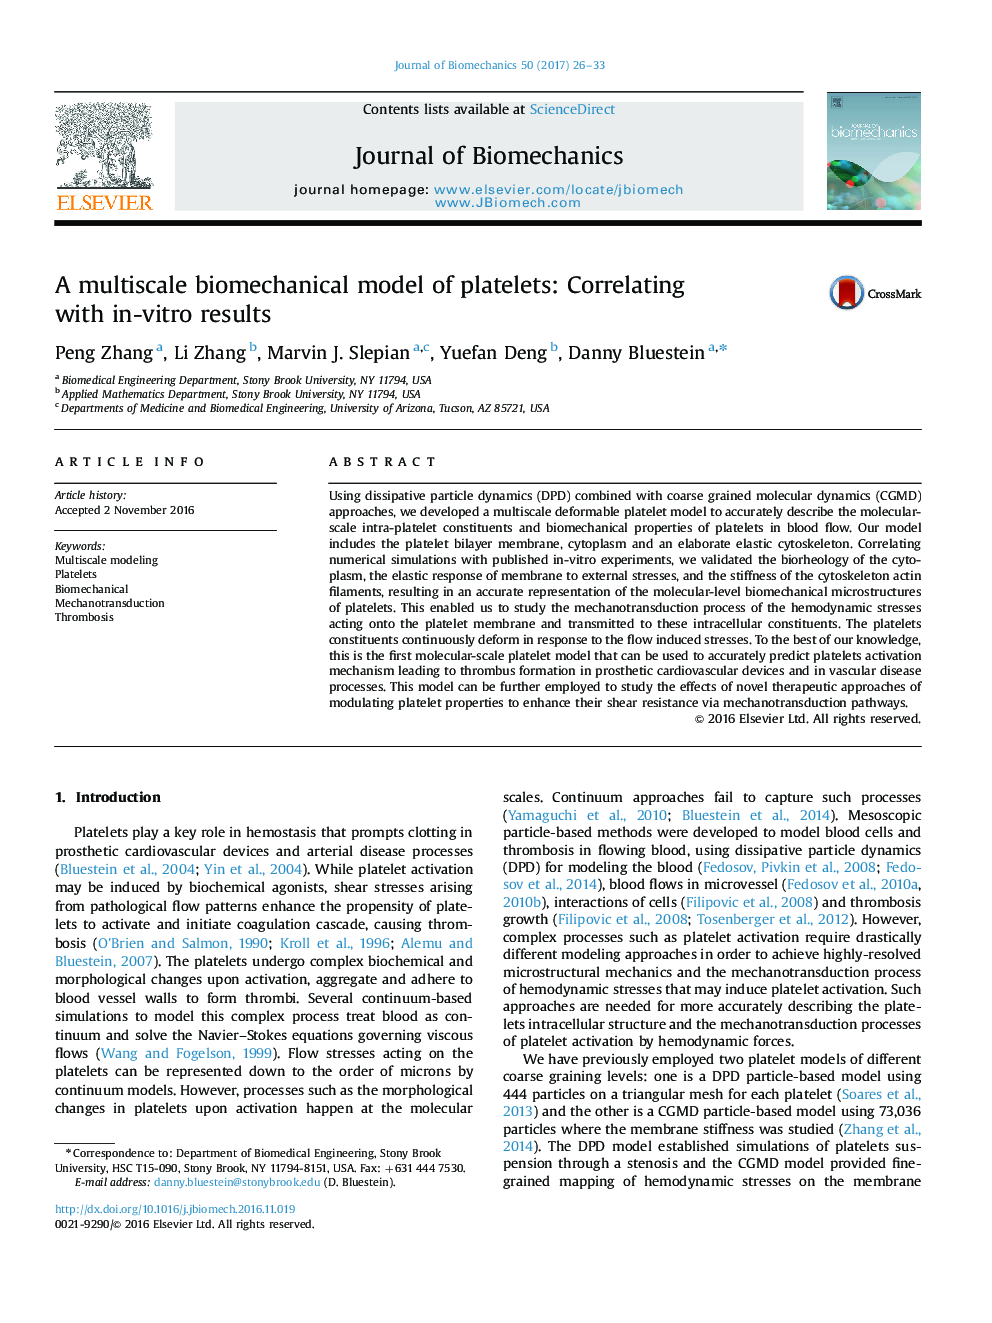 A multiscale biomechanical model of platelets: Correlating with in-vitro results